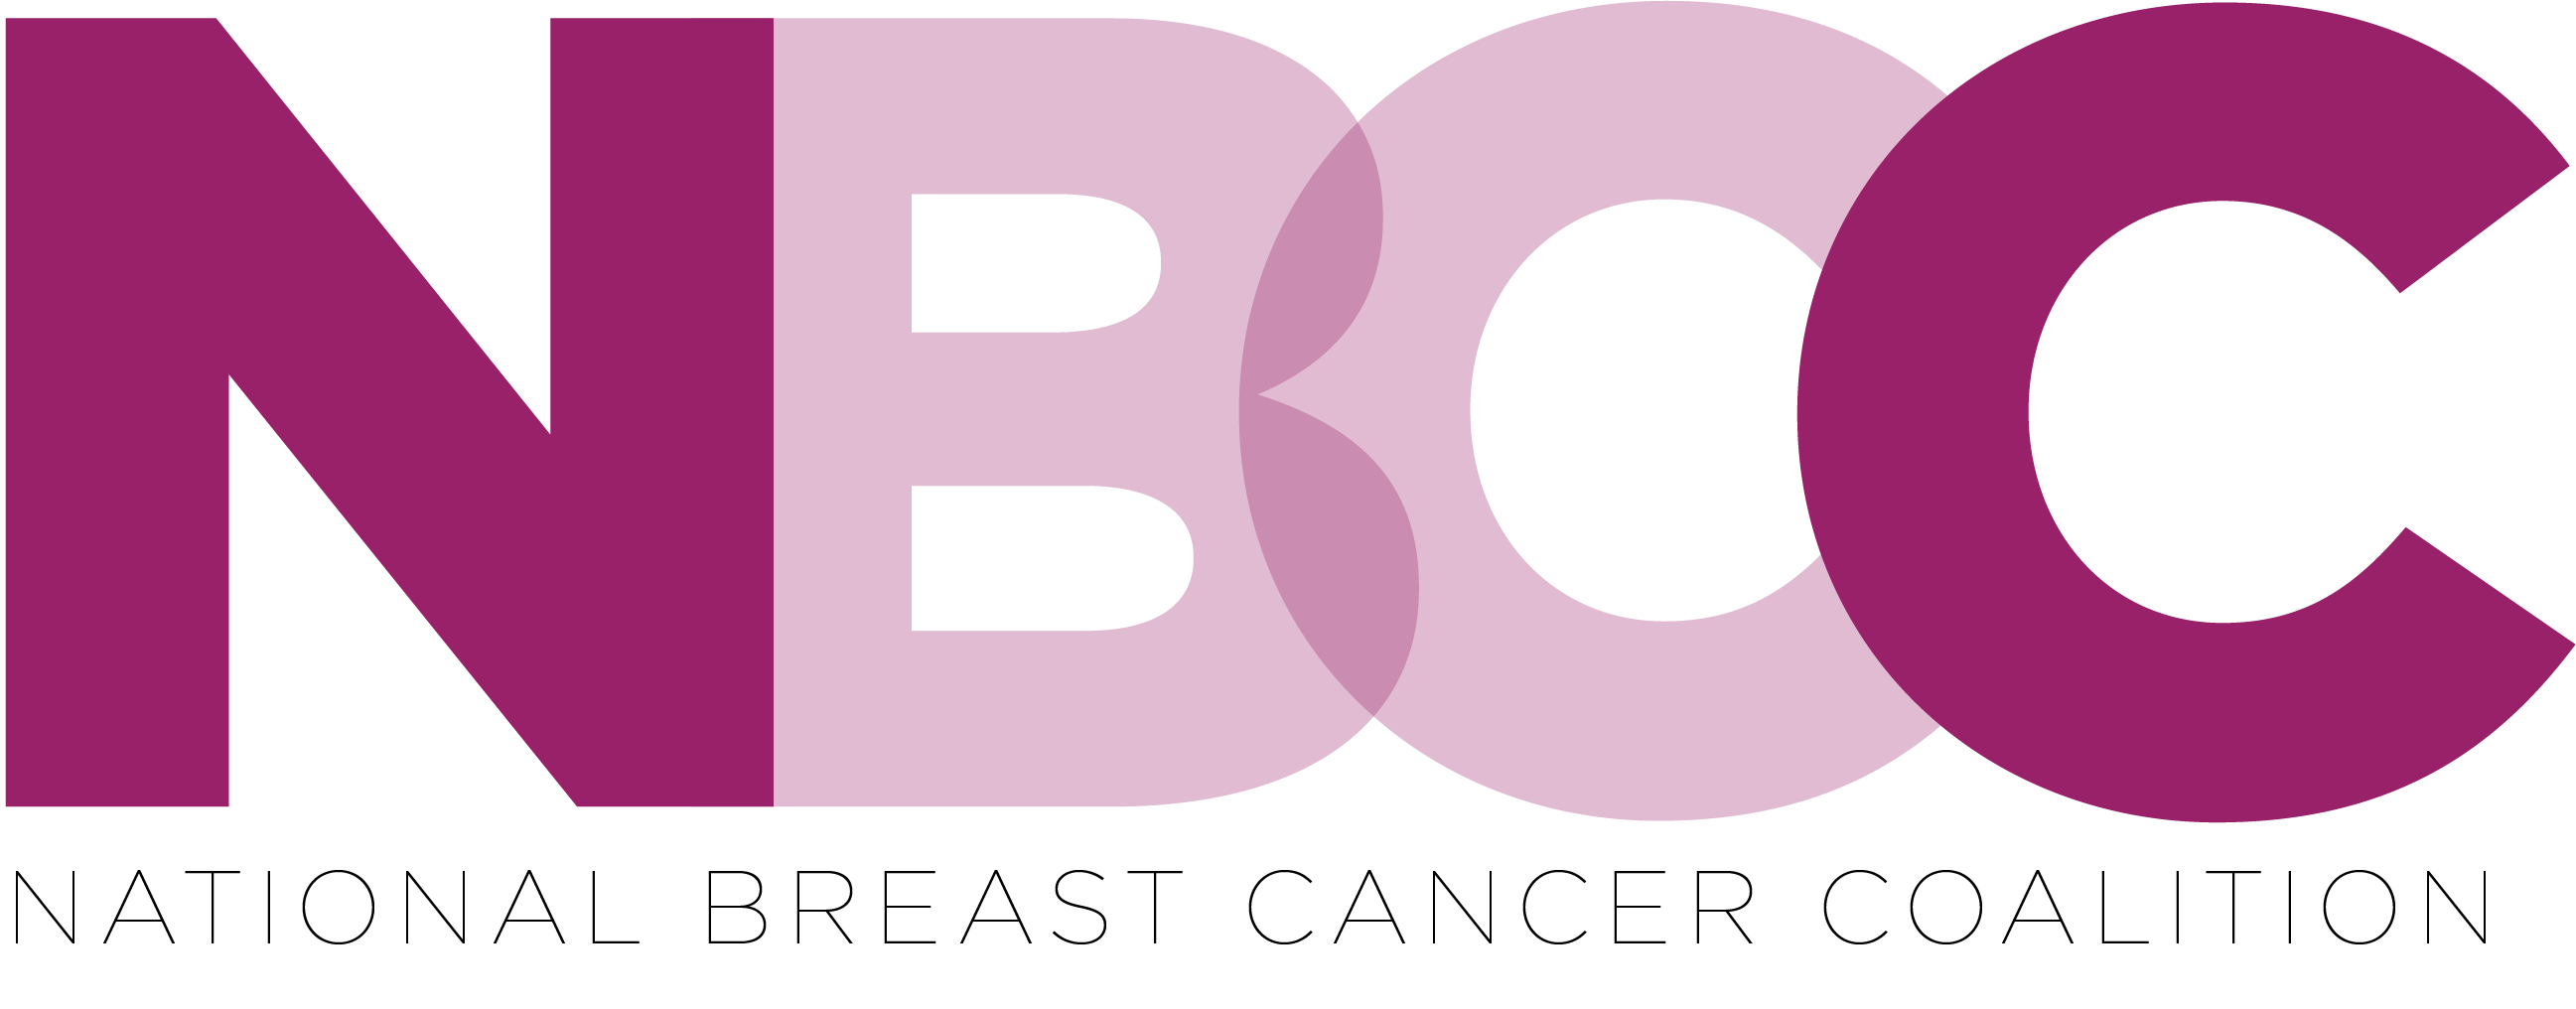 National Breast Cancer Coalition (NBCC) Logo